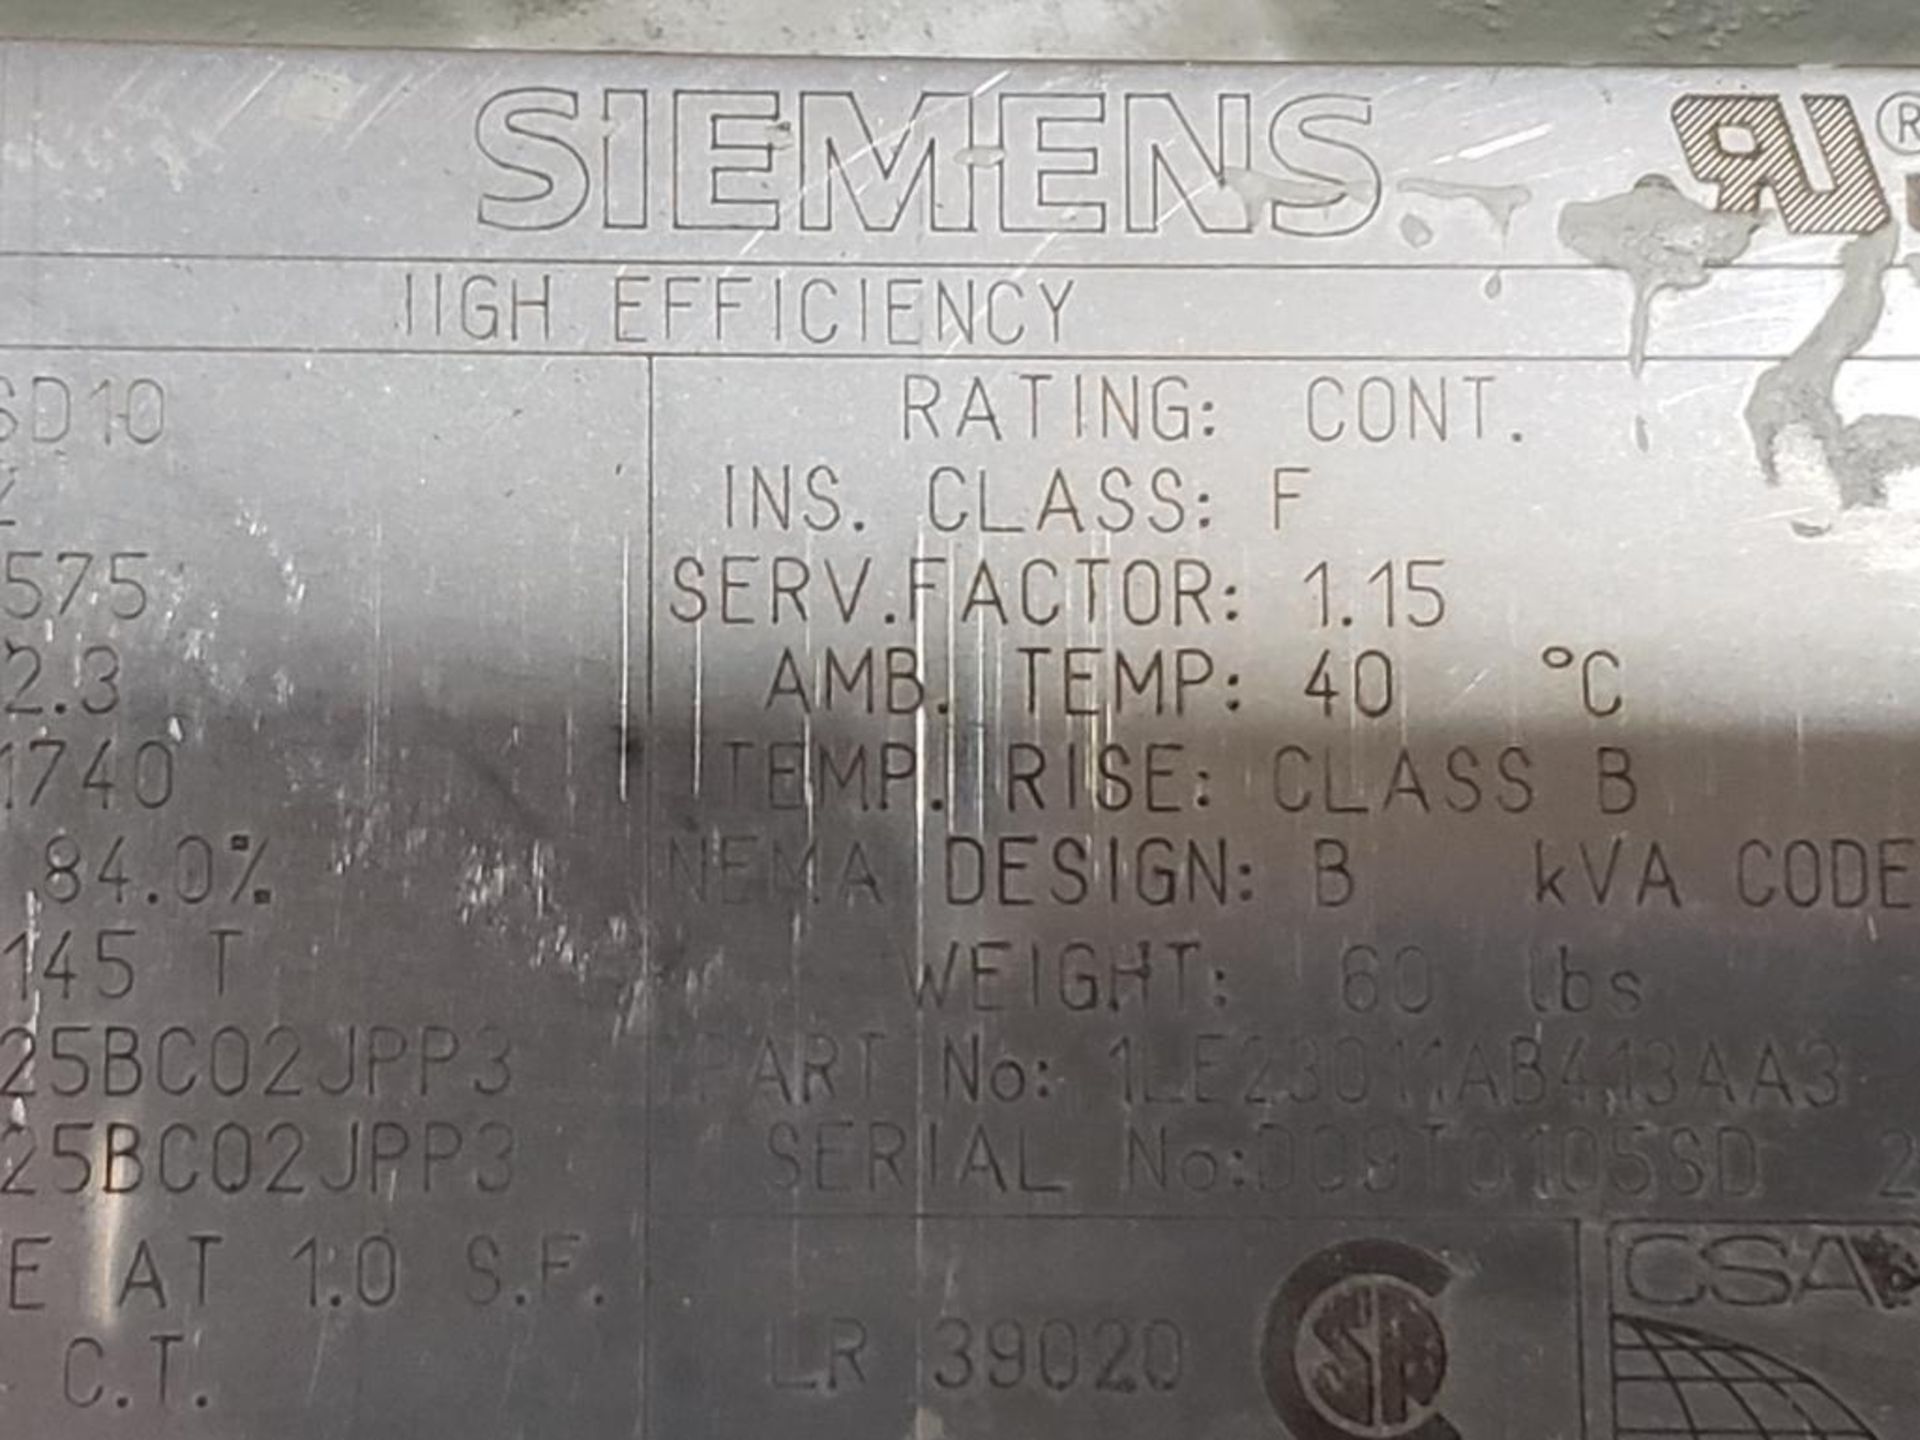 2hp Siemens 1LE23011AB413AA3 high efficiency motor. 3 phase, 575V, 1740RPM, 145T-Frame 2HP - Image 6 of 8